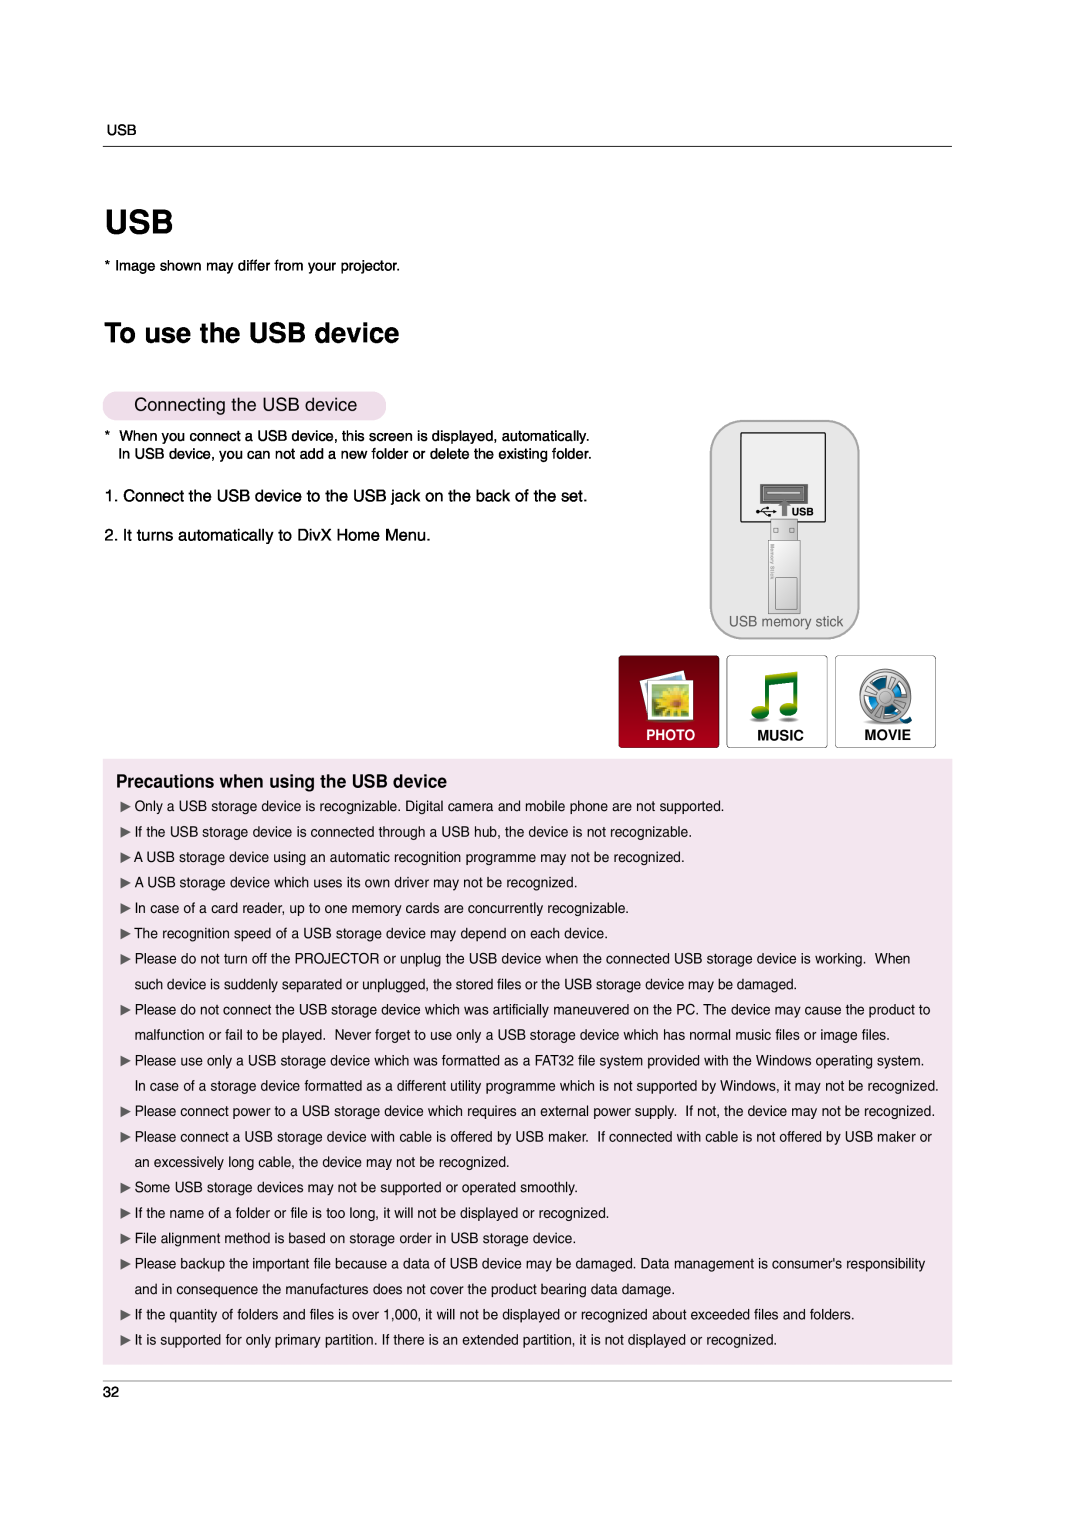 LG Electronics HS102 To use the USB device, Connecting the USB device, It turns automatically to DivX Home Menu 